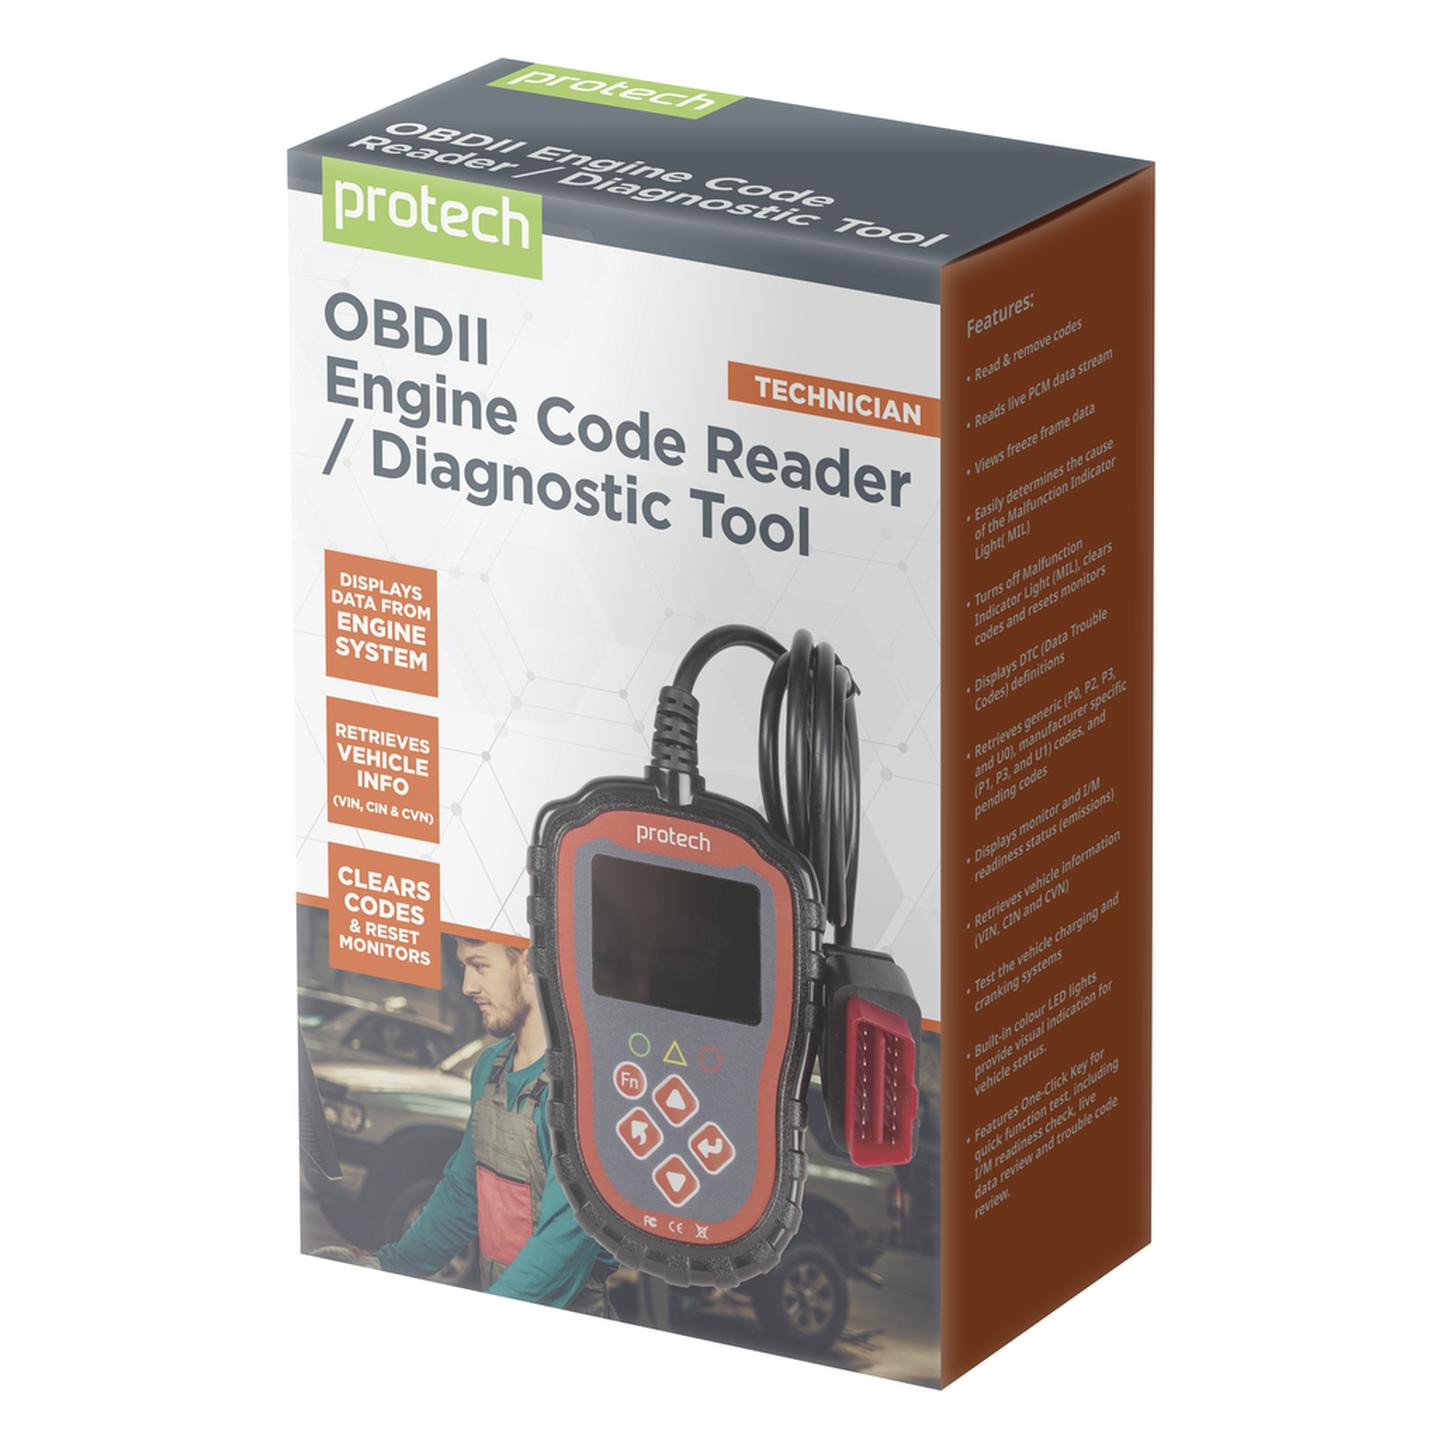 OBD-II Engine Code Reader/Diagnostic Tool with 2.4in LCD